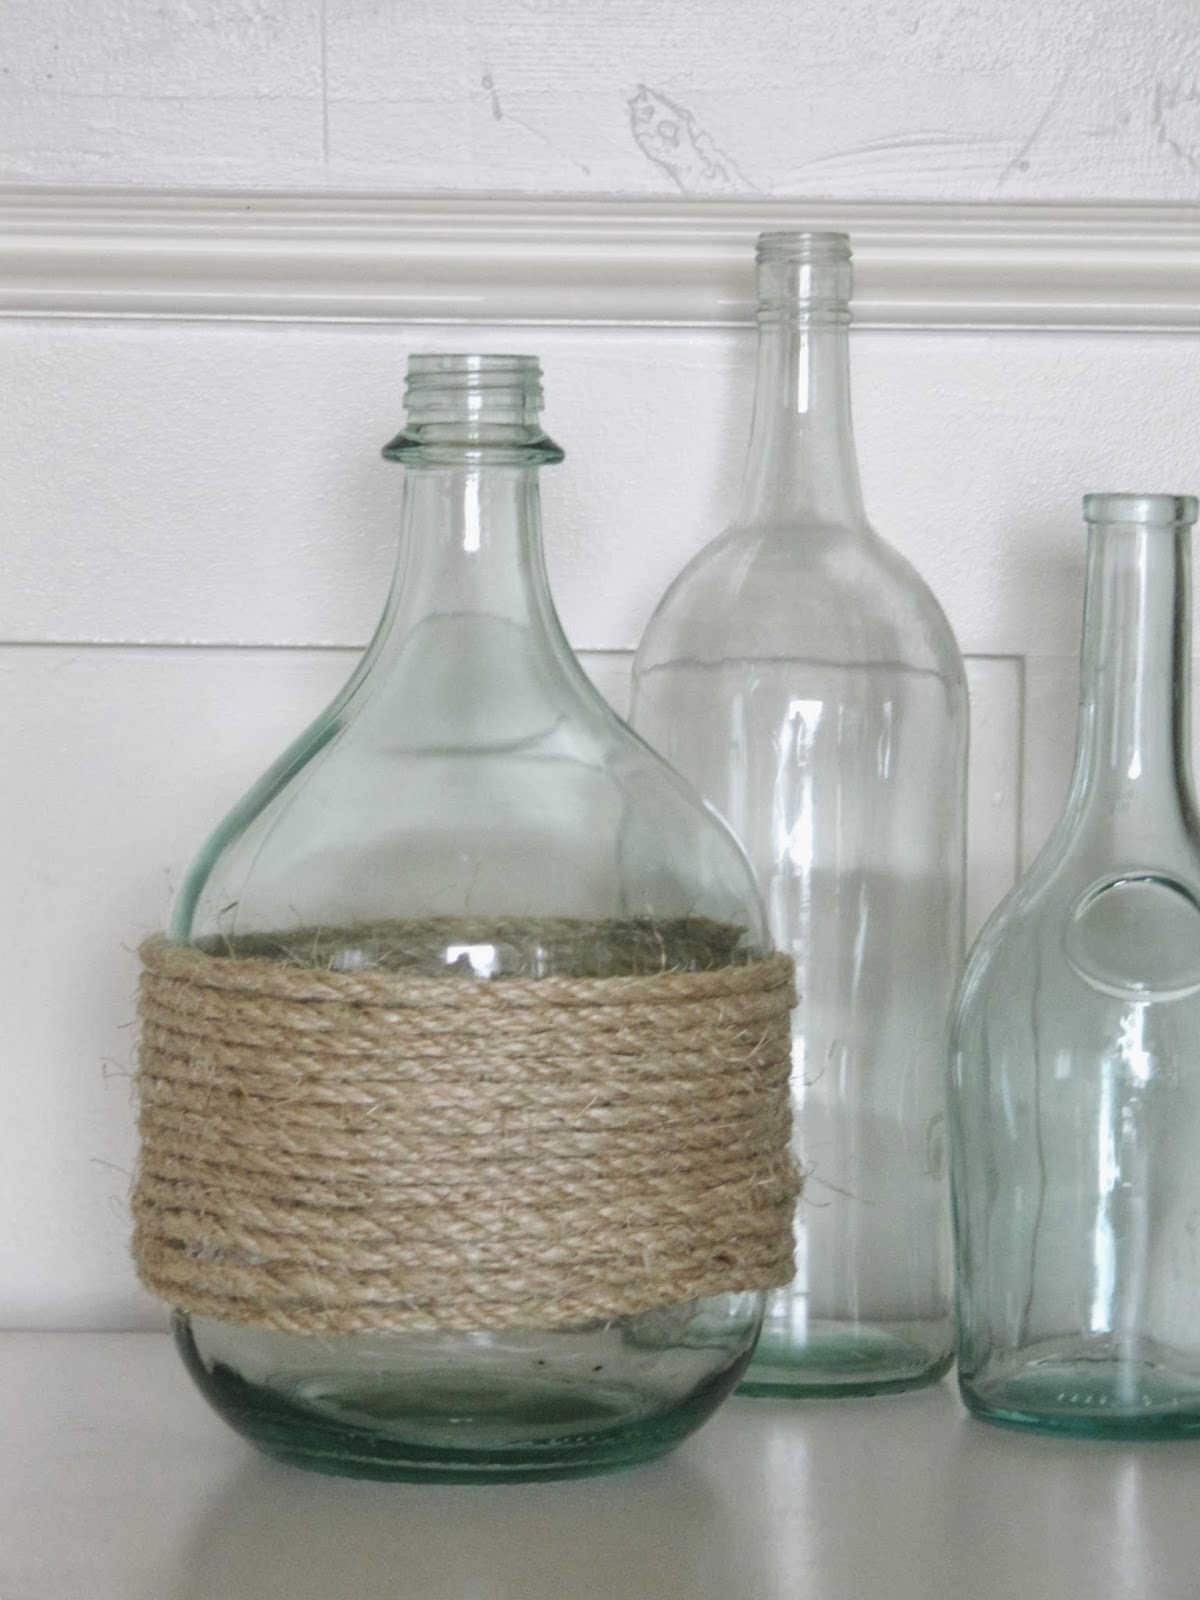 Glass bottle with rope around it, next to two other glass bottles